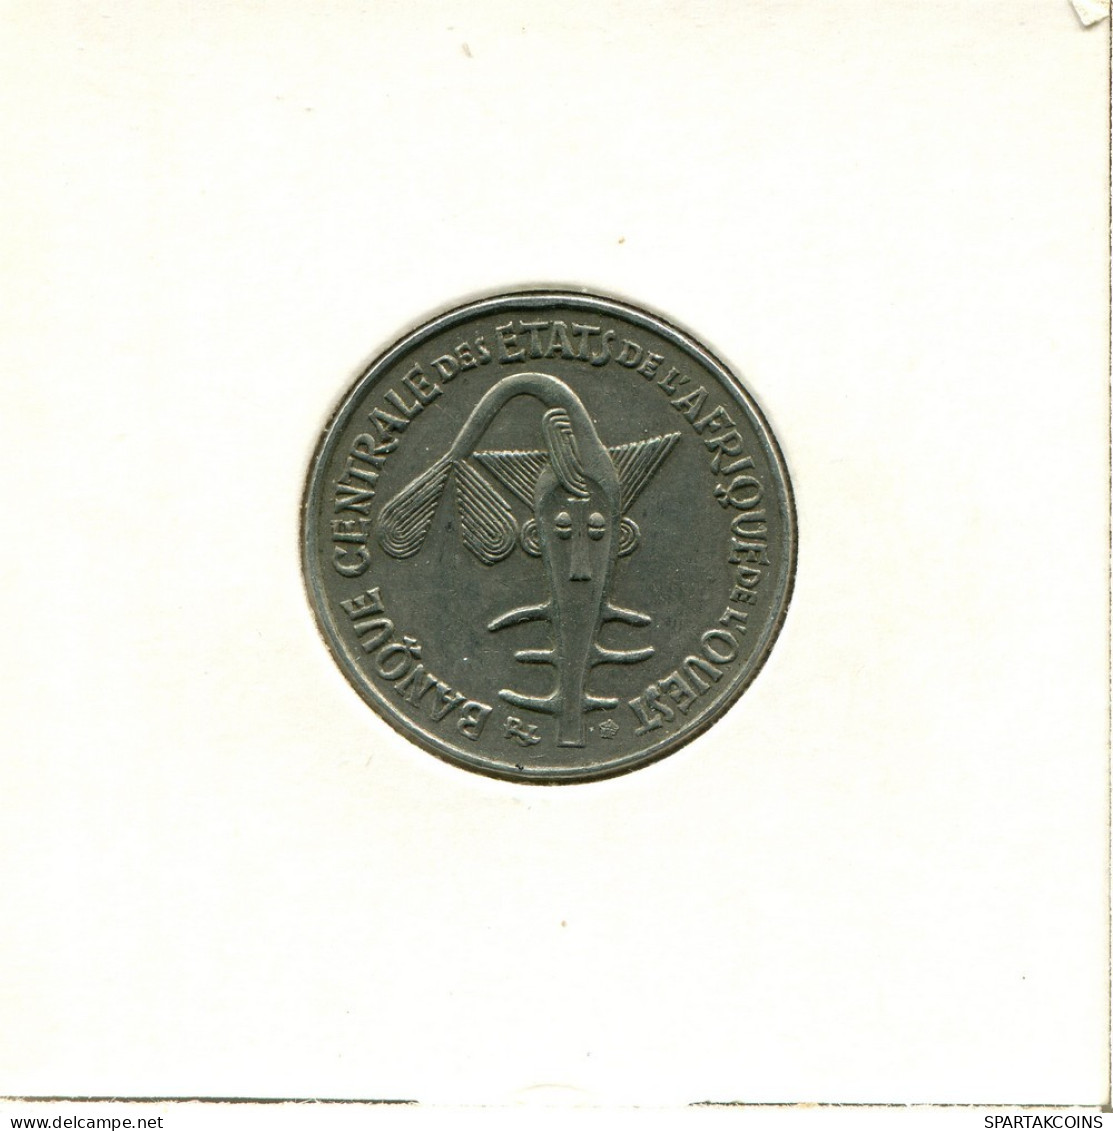 50 FRANCS CFA 1997 Western African States (BCEAO) Moneda #AT047.E.A - Other - Africa